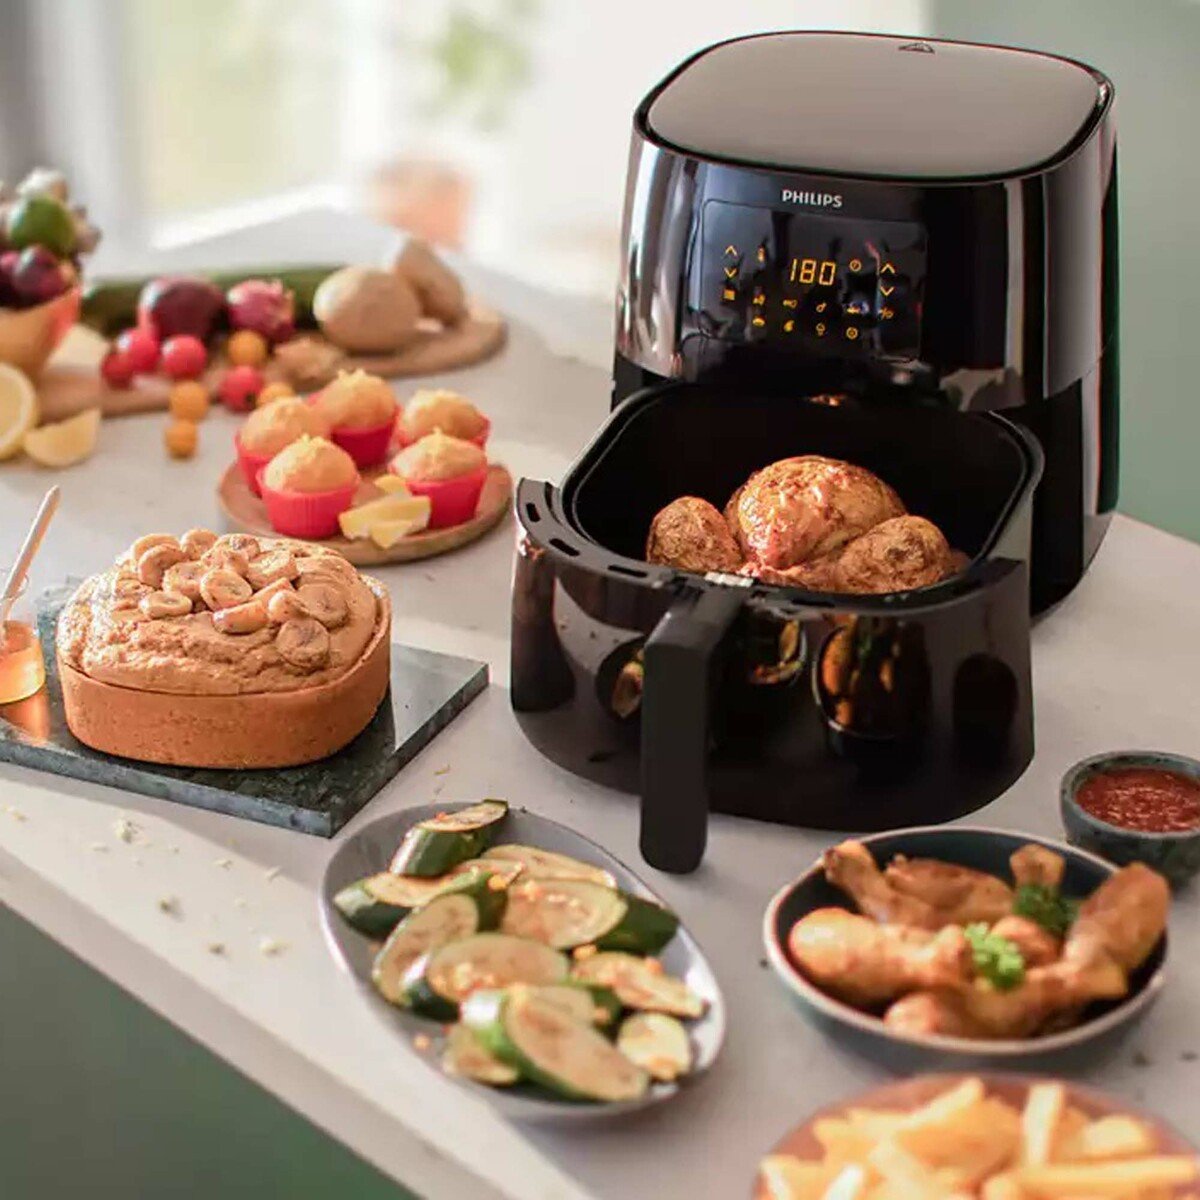  Philips Kitchen Appliances Philips Essential Compact 1.8lb/4.1L  Capacity Airfryer with Rapid Air Technology, Easy Clean Basket, Black-  HD9200/91 : Home & Kitchen